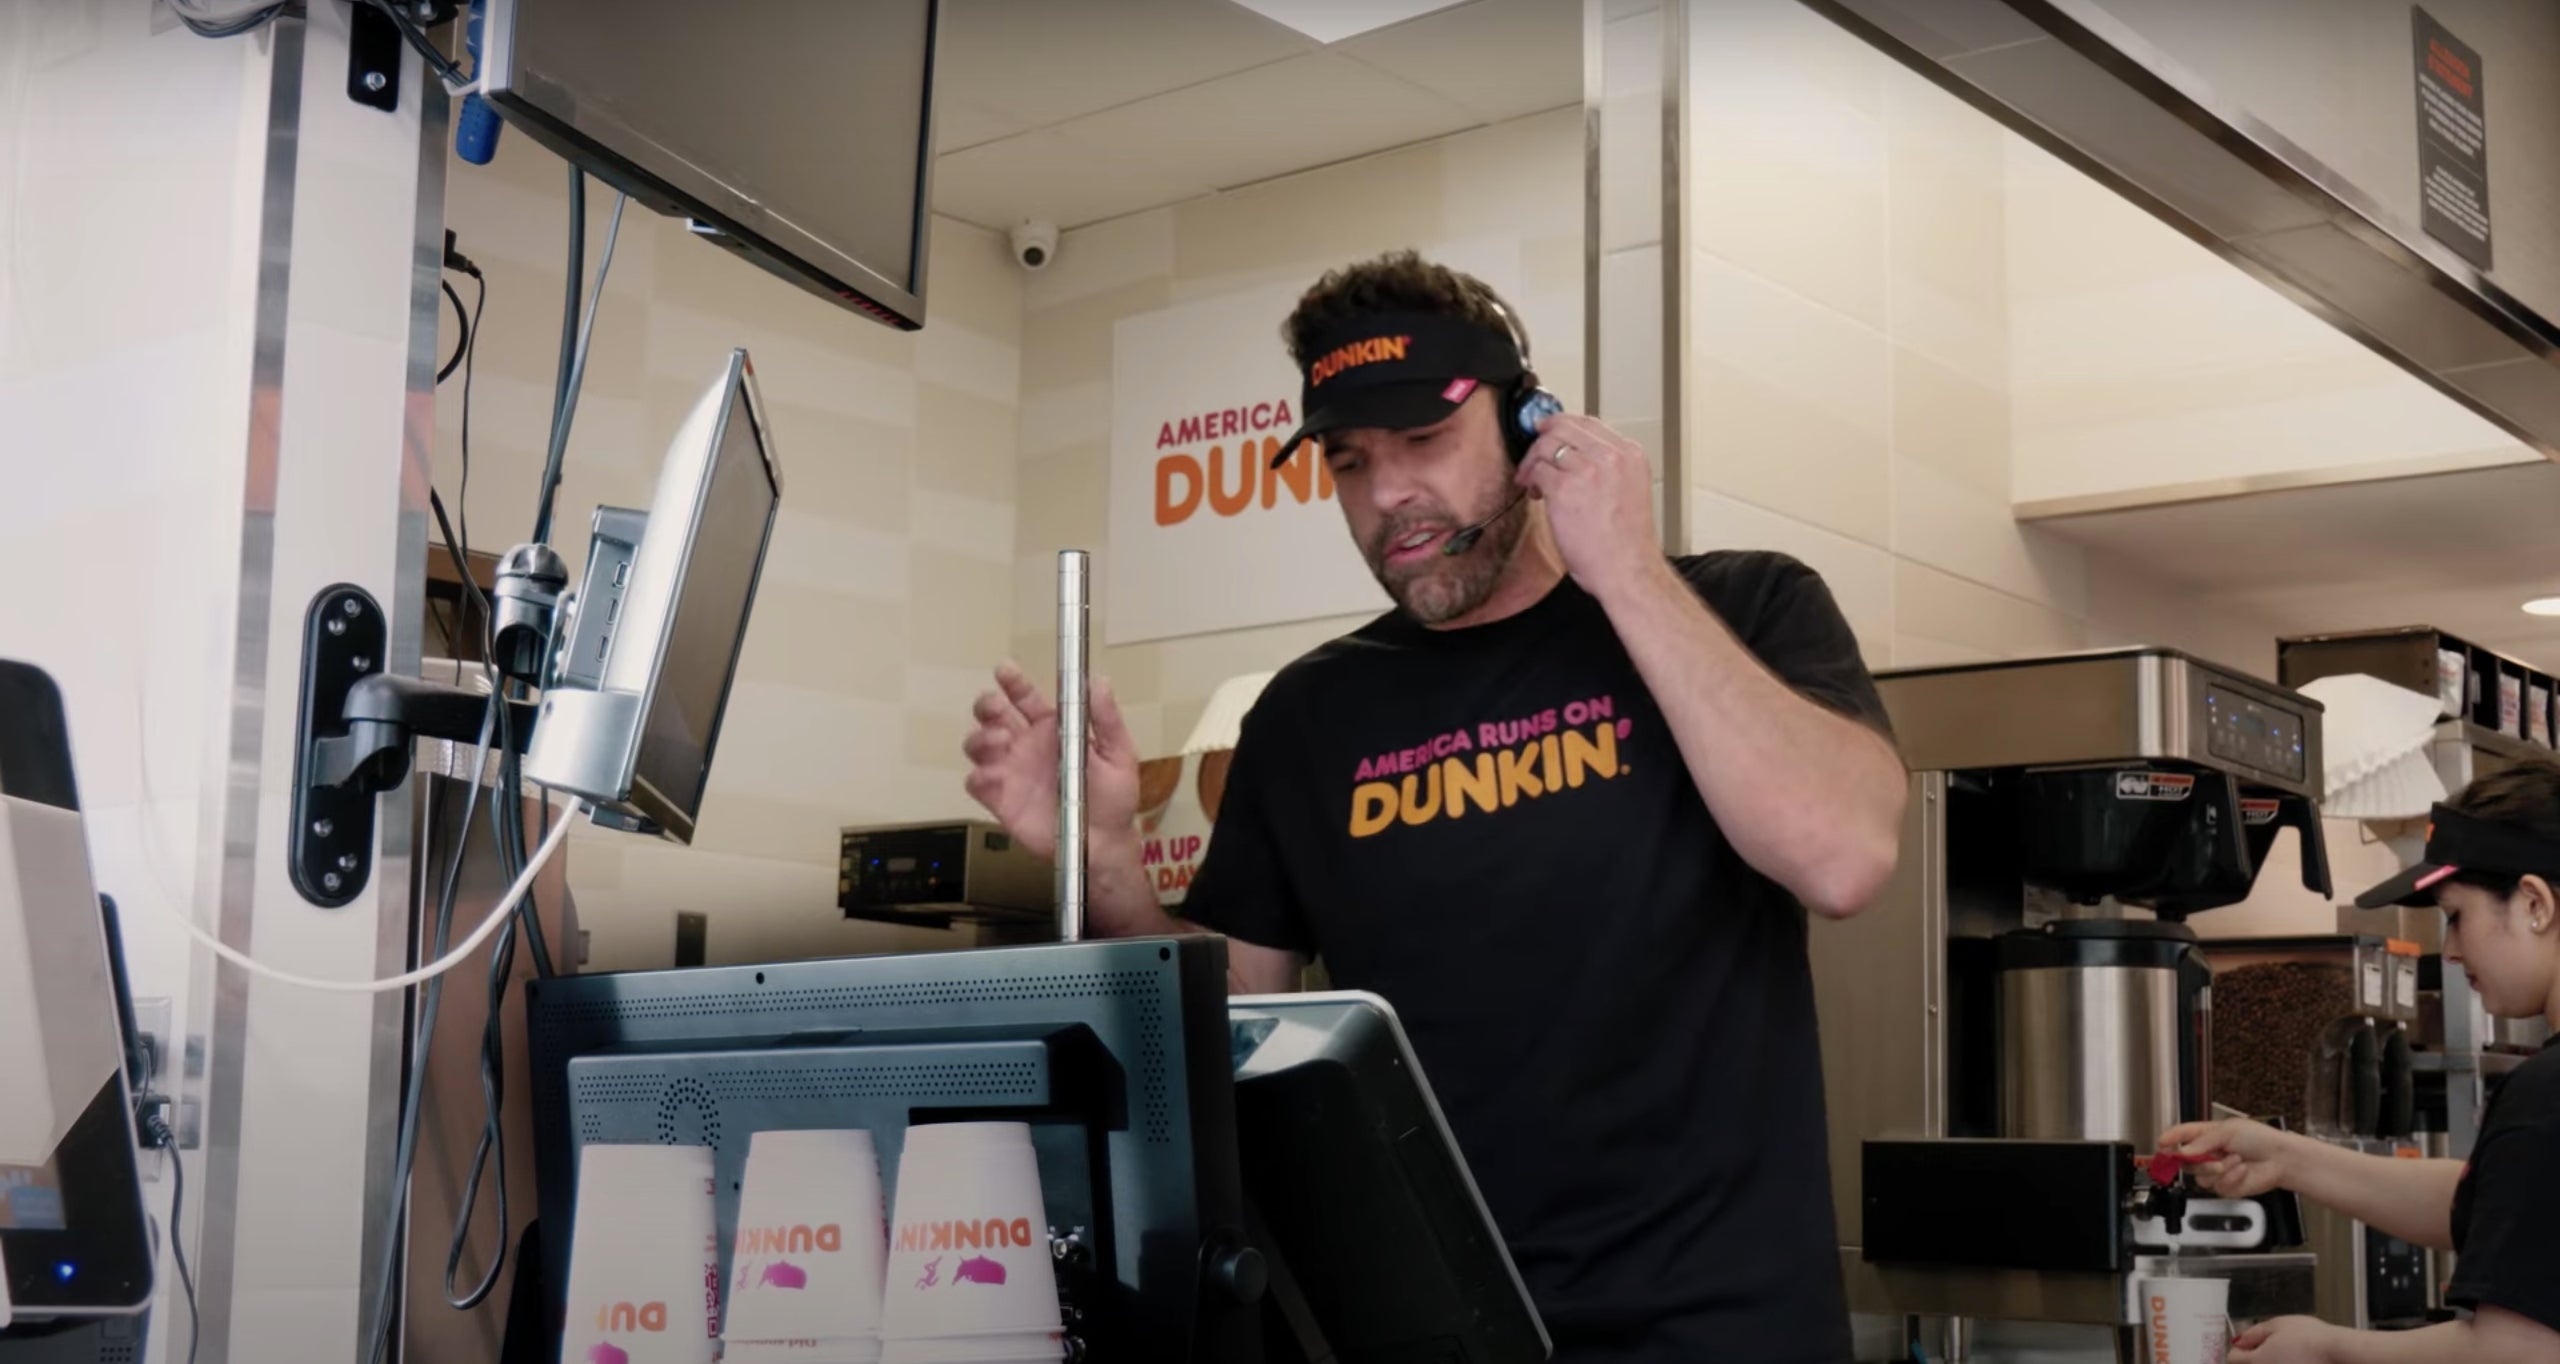 Ben Affleck stars in outtakes for the Dunkin' Super Bowl commercial.